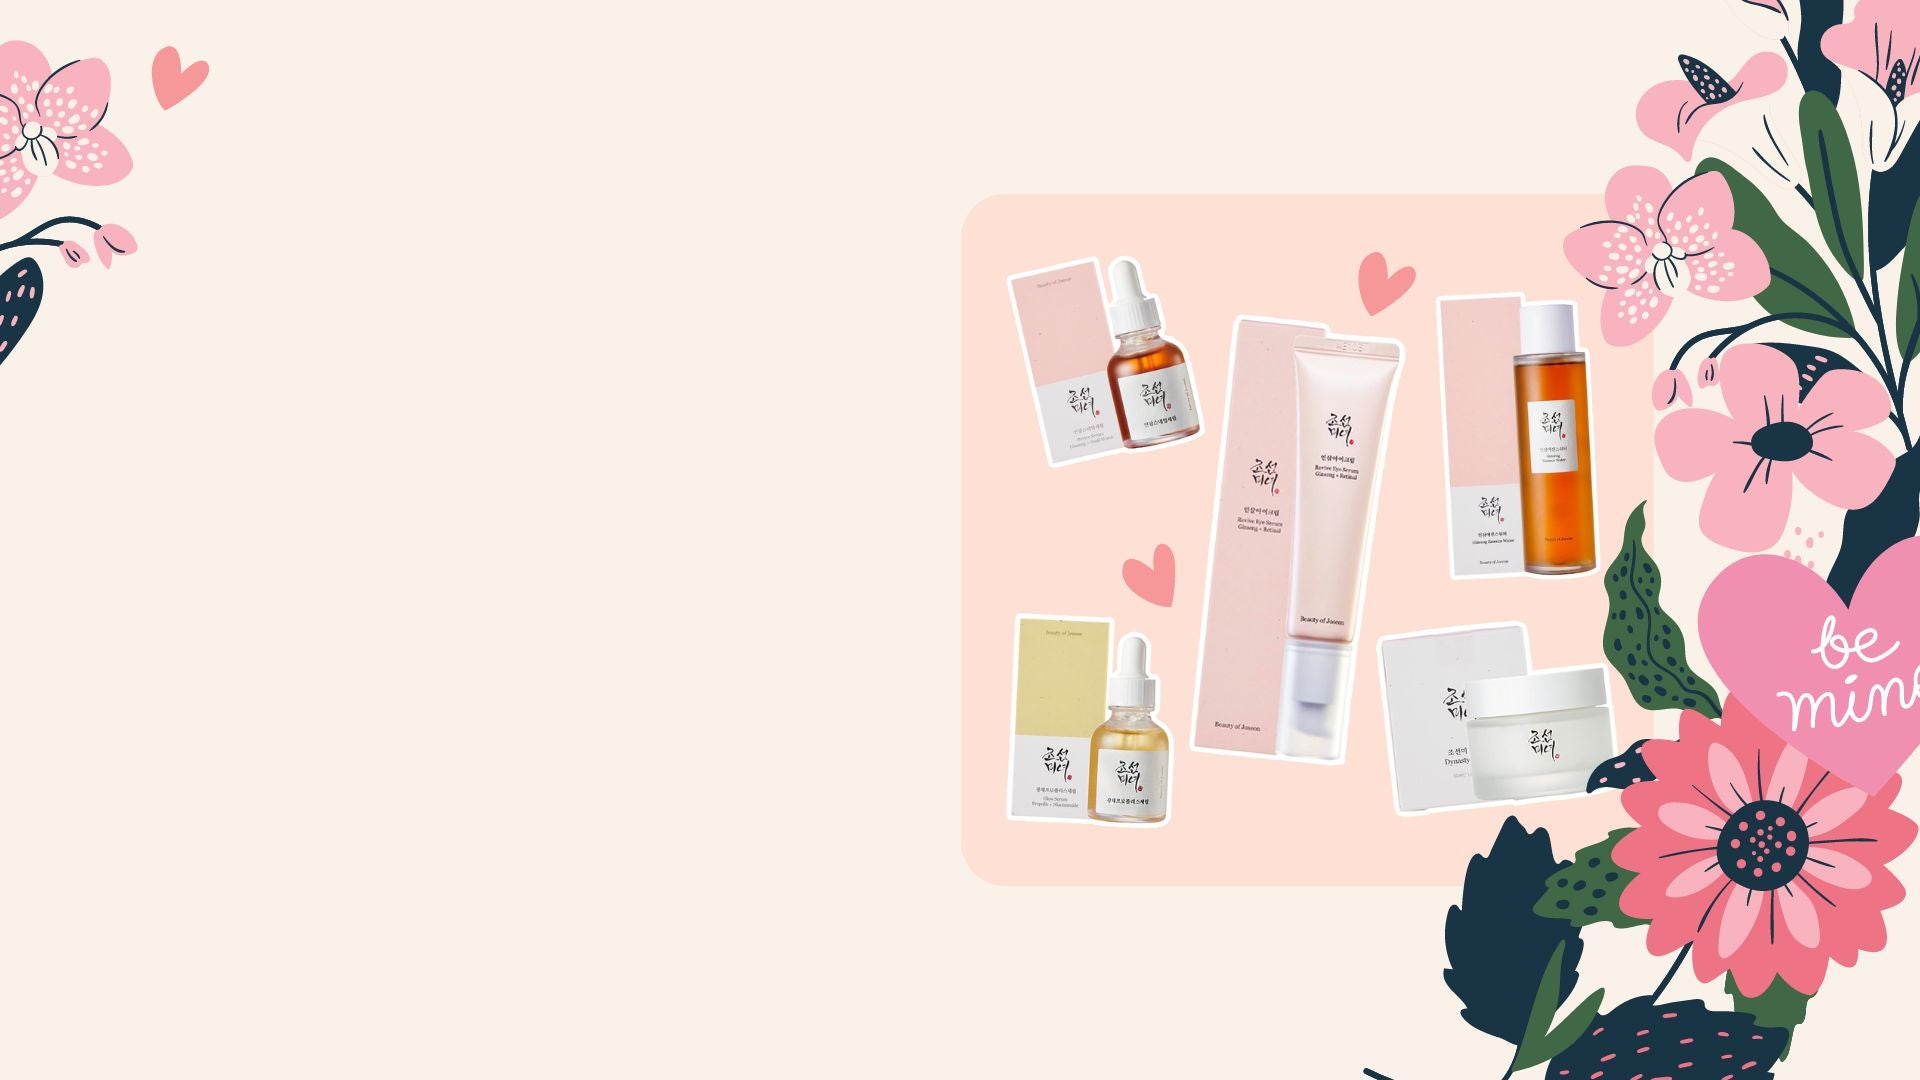 Celebrate the Season of Love with the Gift of Radiant Skin